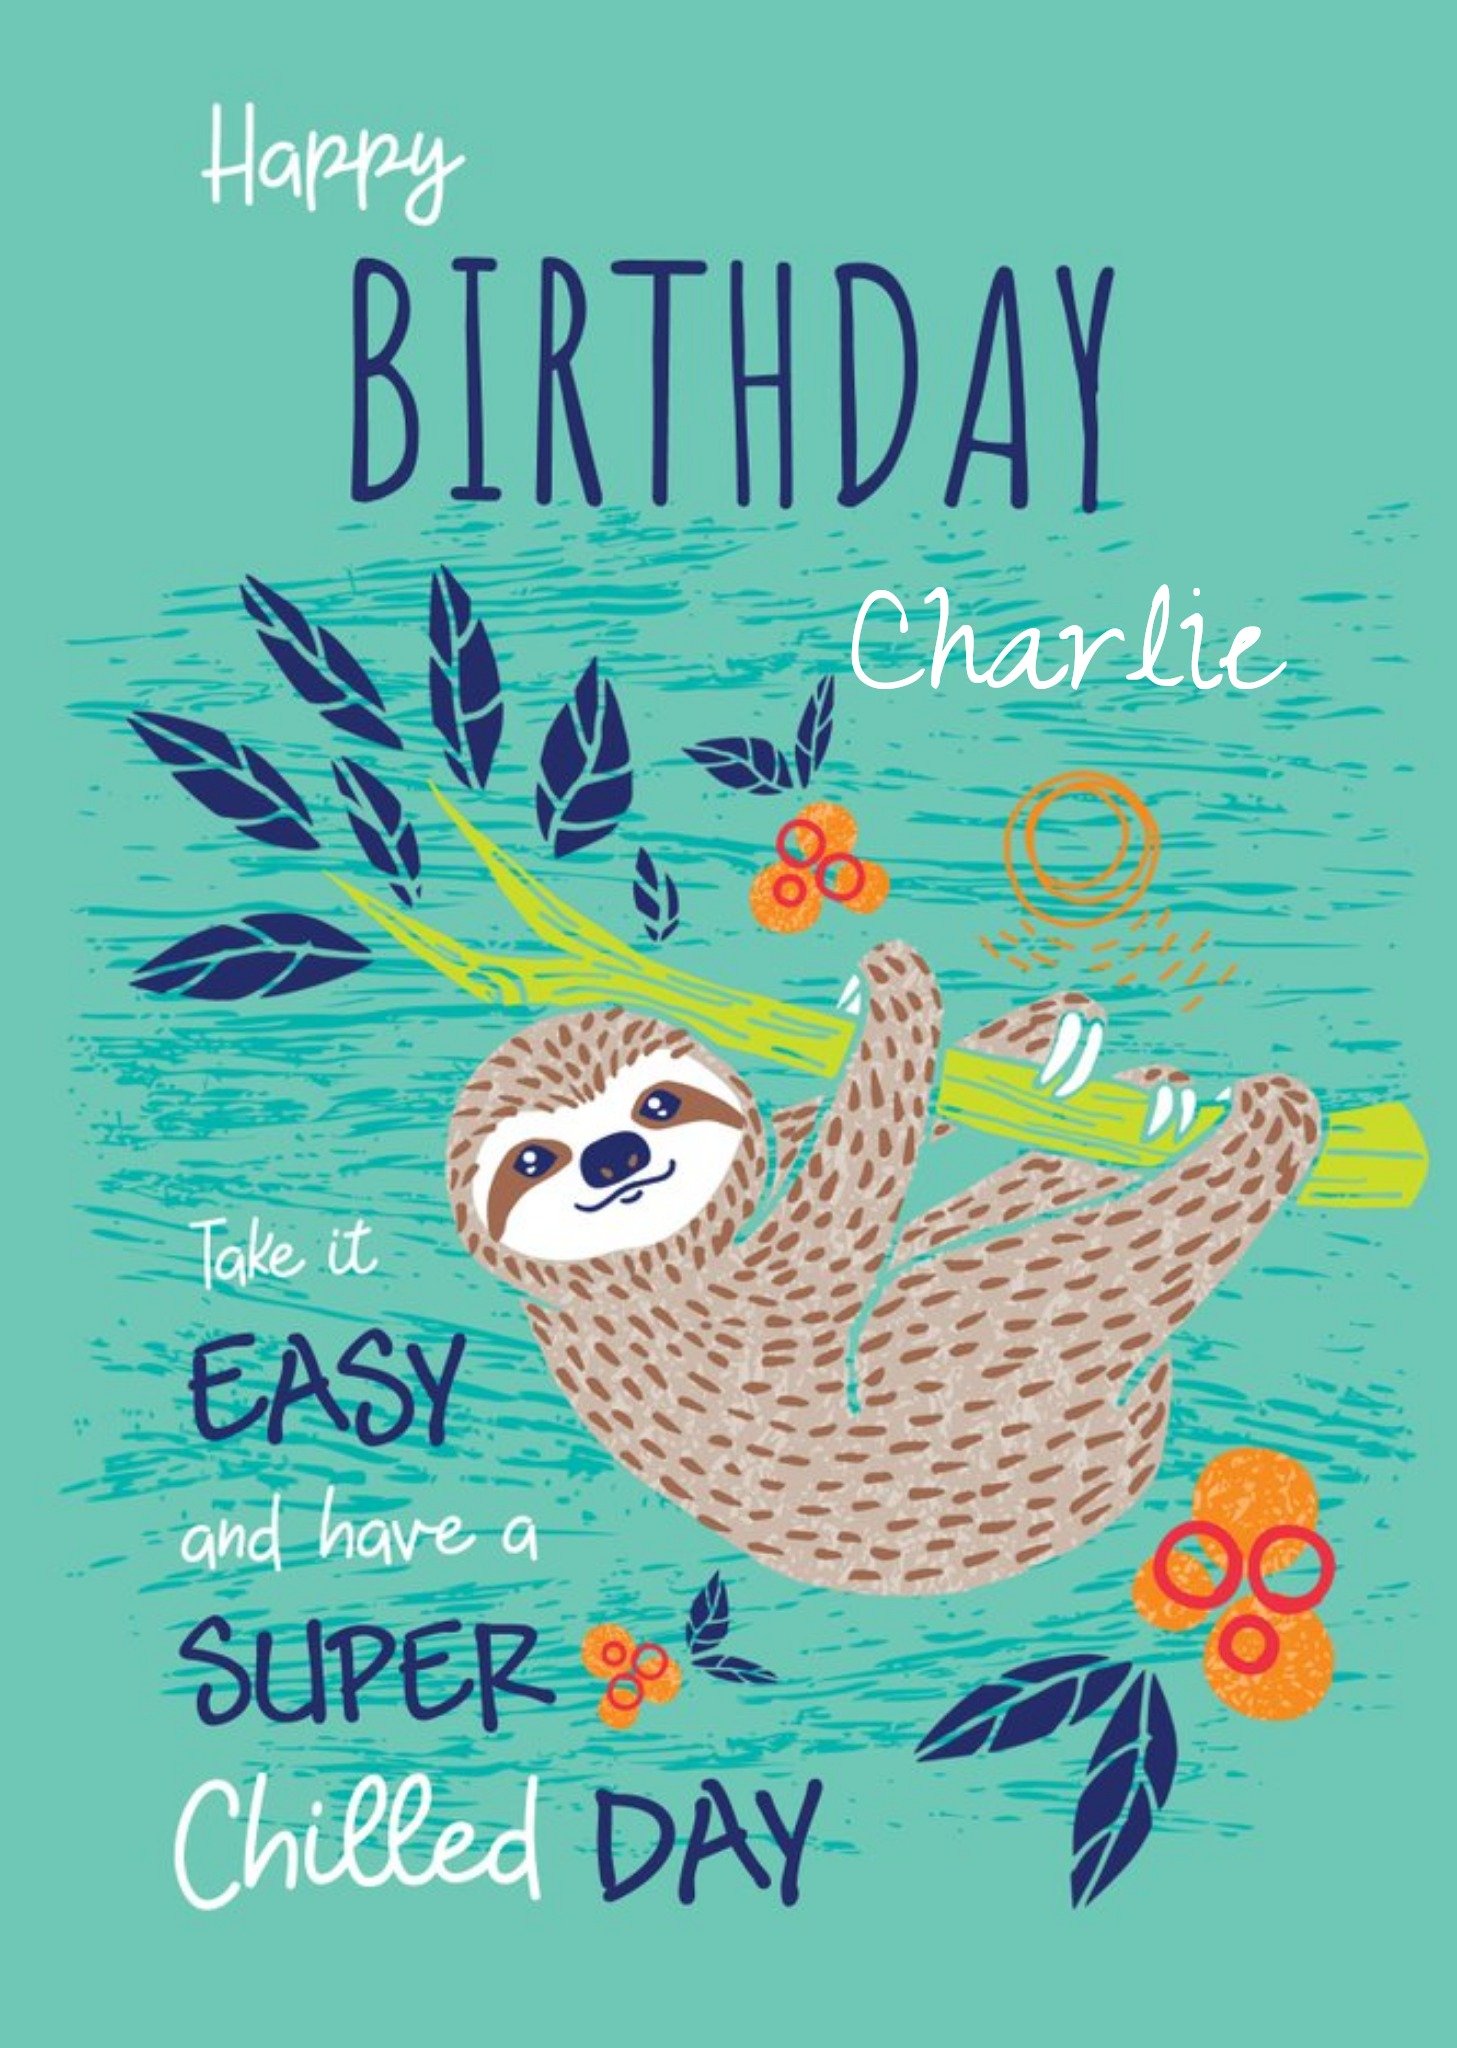 Moonpig Animal Planet Bright Graphic Illustration Of A Sloth. Have A Super Chilled Day Birthday Card